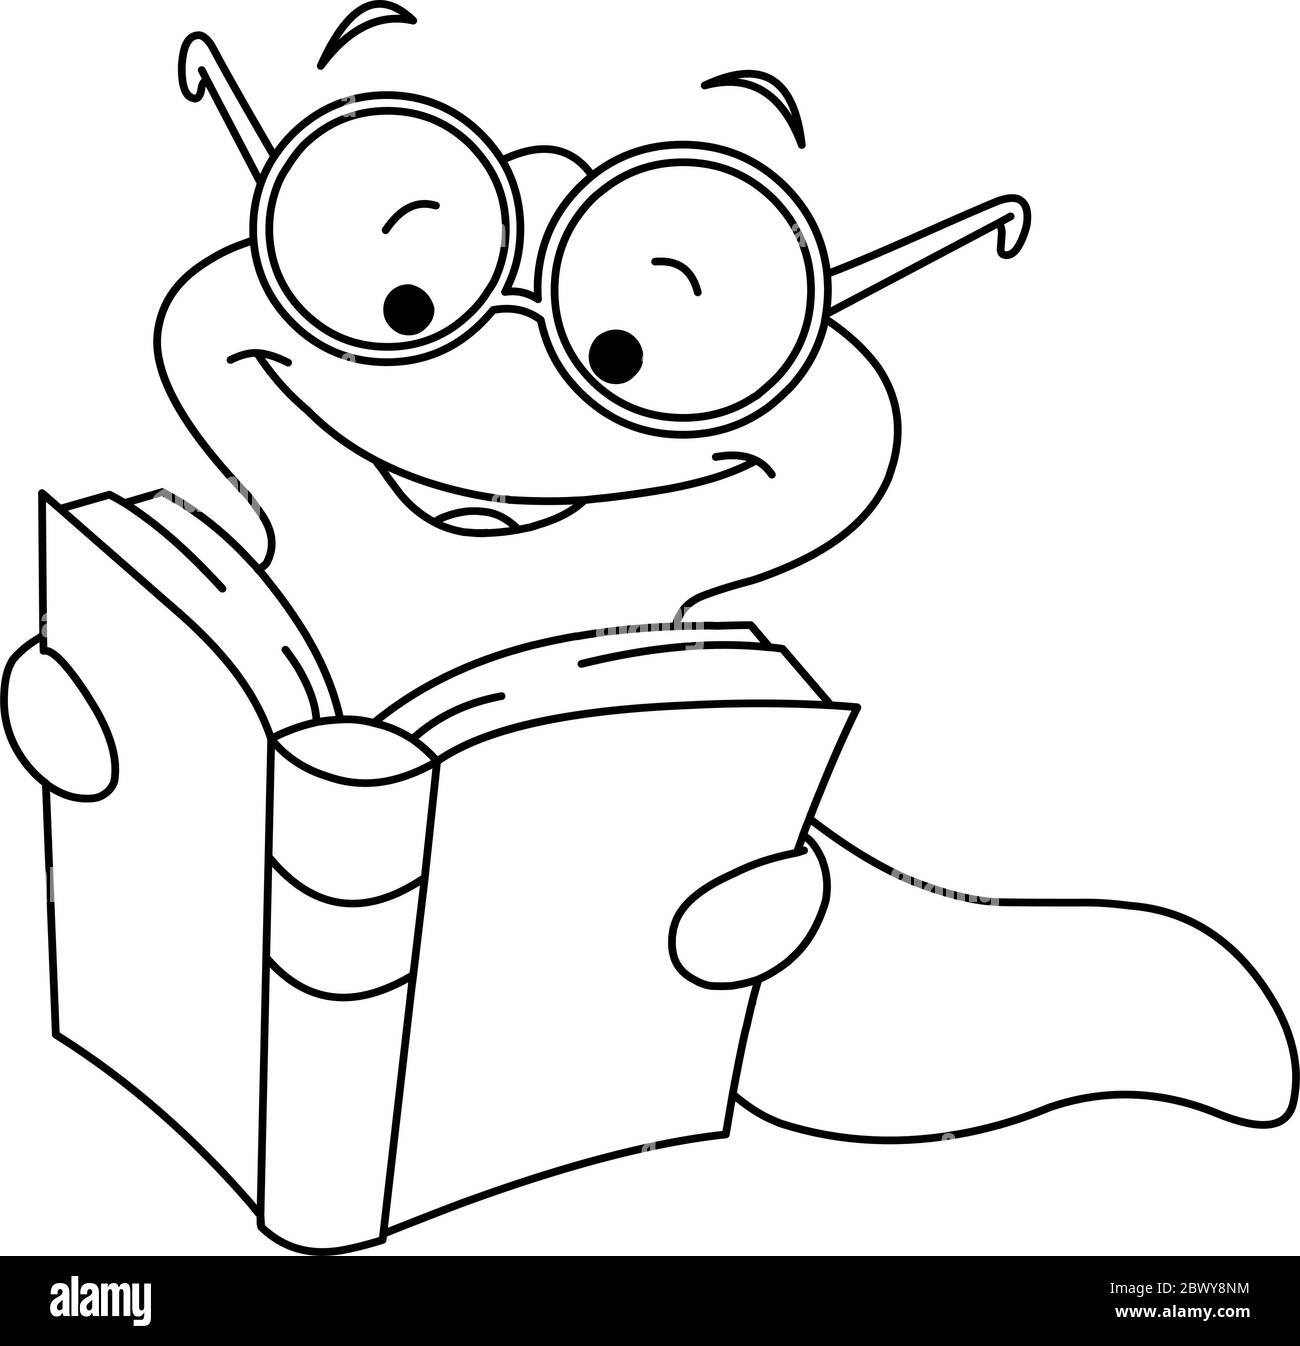 Outlined book worm stock vector image art